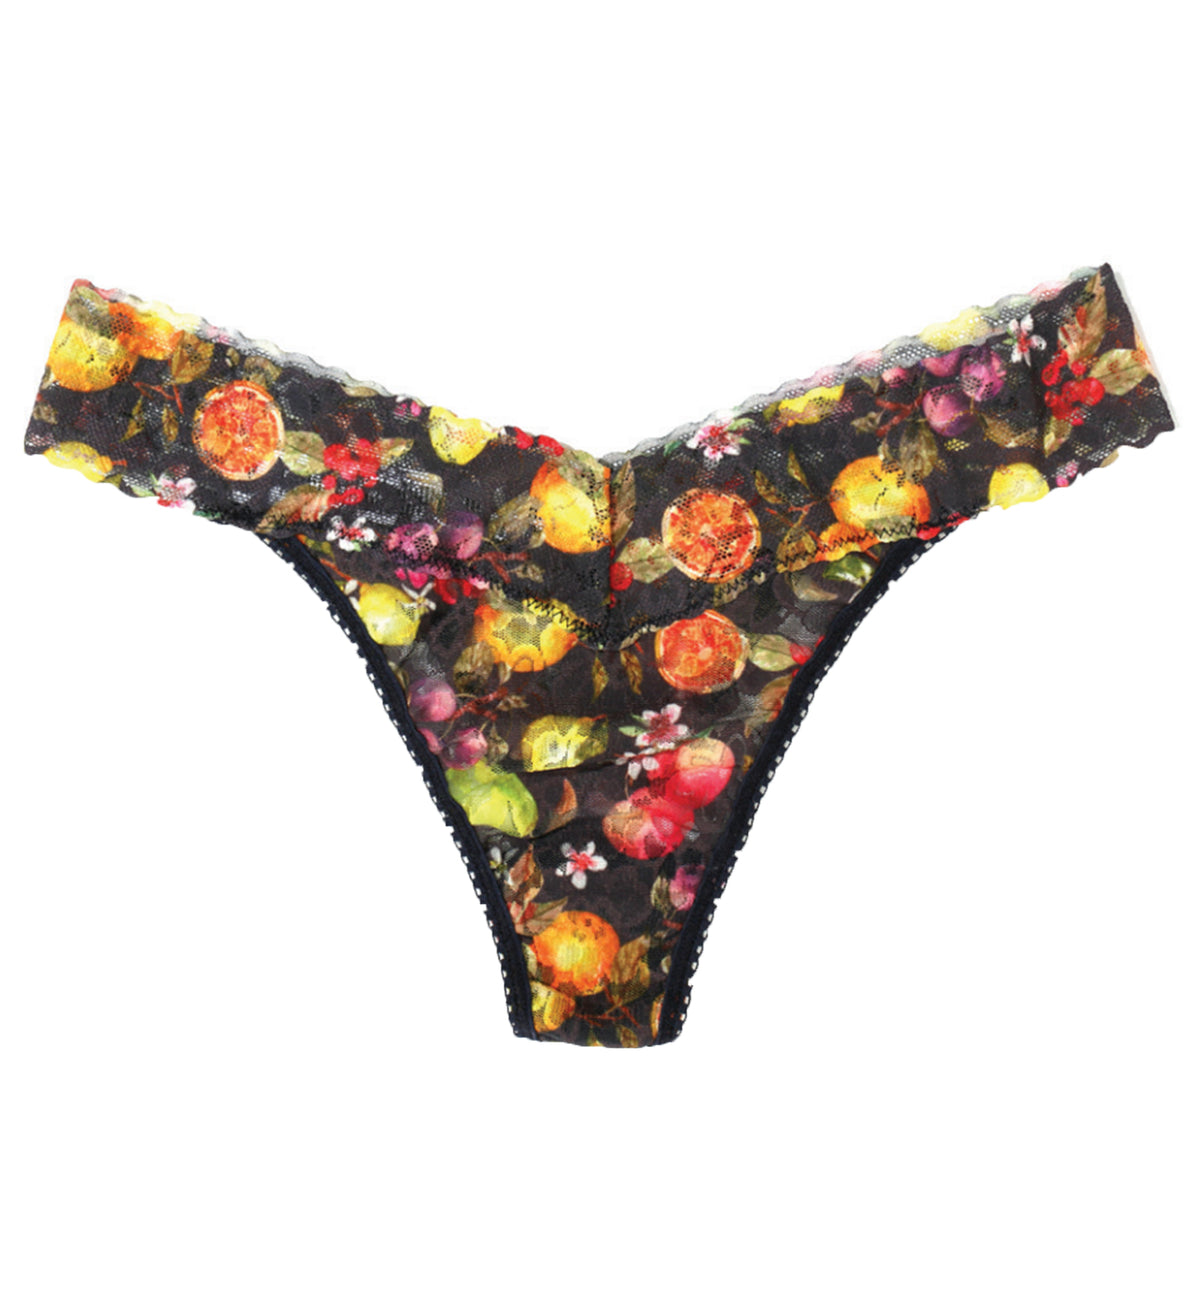 Hanky Panky Signature Lace Printed Original Rise Thong (PR4811P),Picnic for One - Picnic for One,One Size